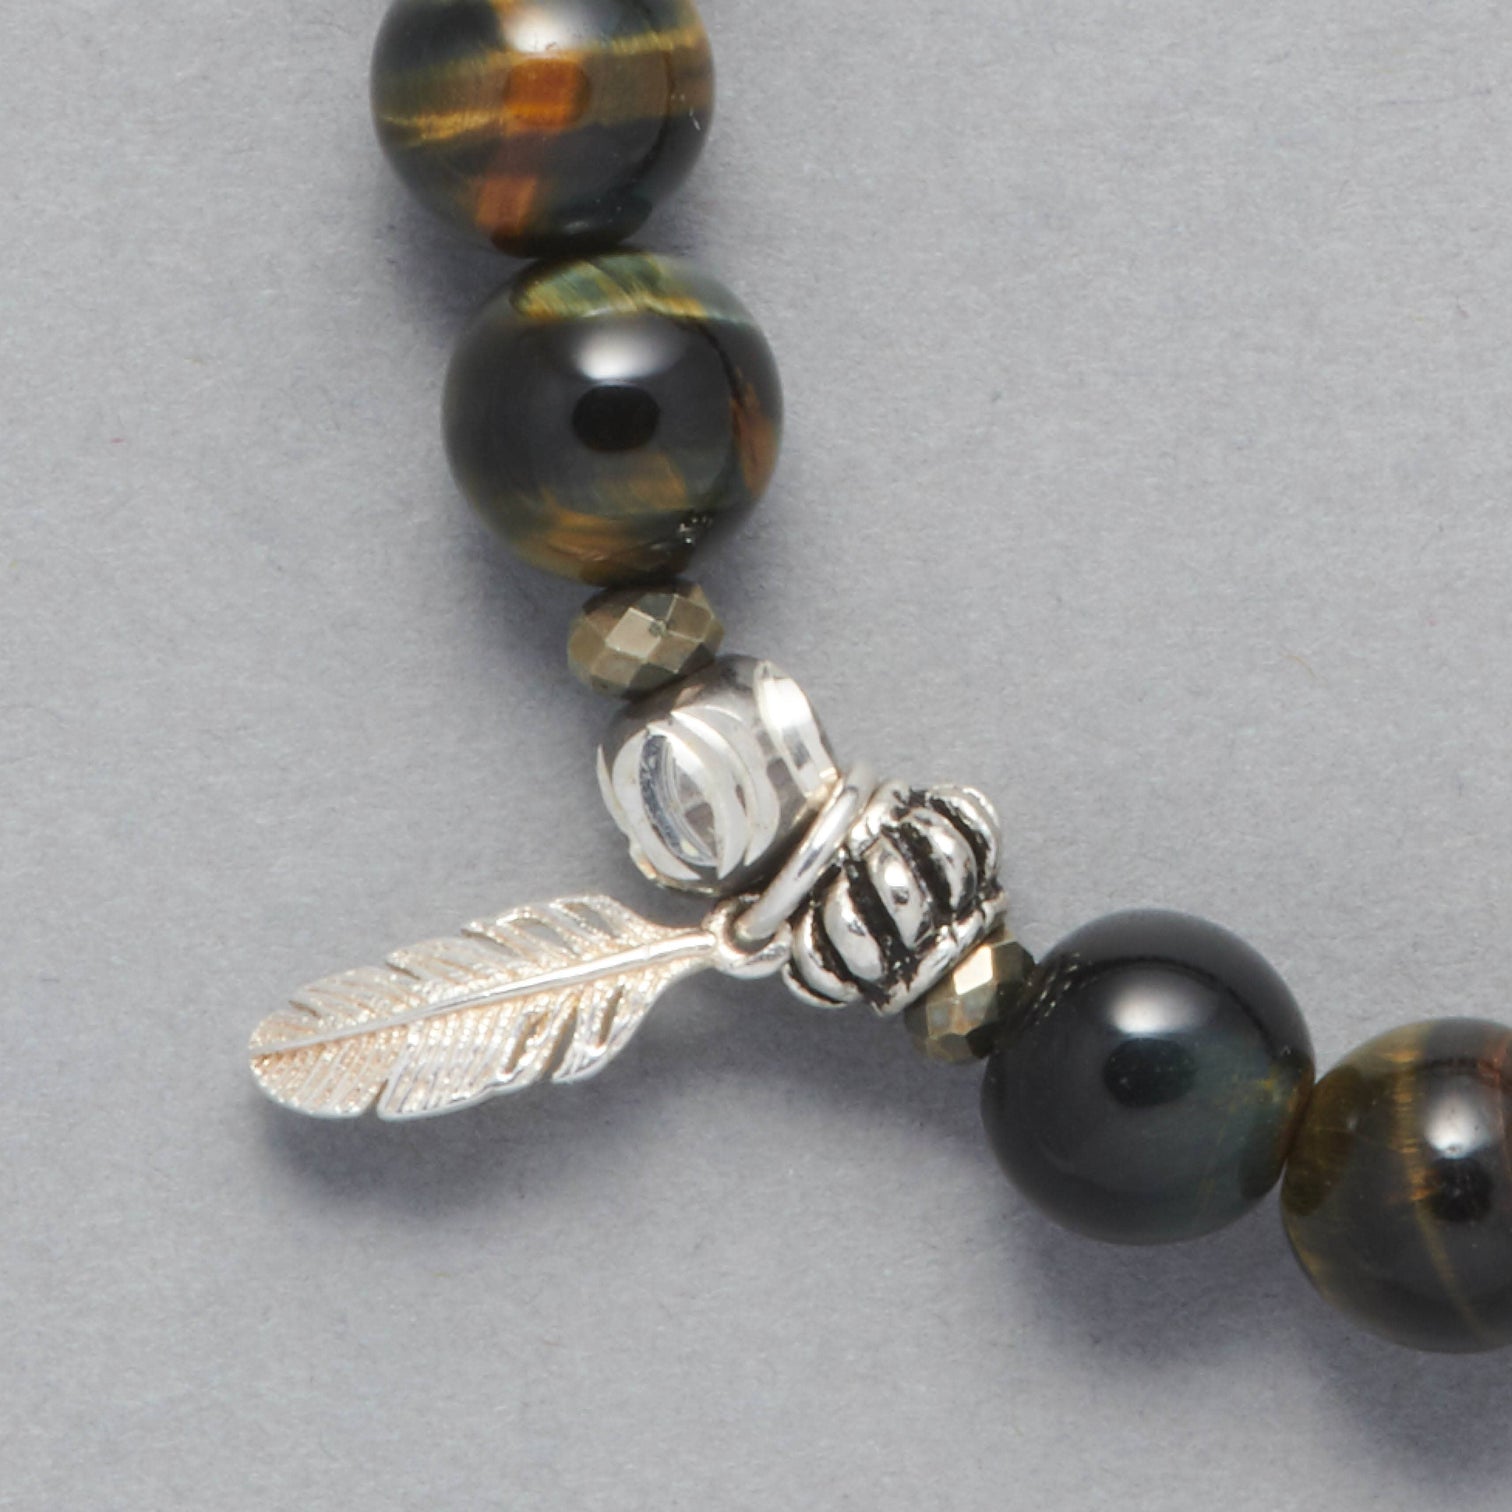 Detail of the Cheyenne bracelet made with Blue Tiger Eye, Sterling Silver Elements and a Sterling Silver feather charm. 